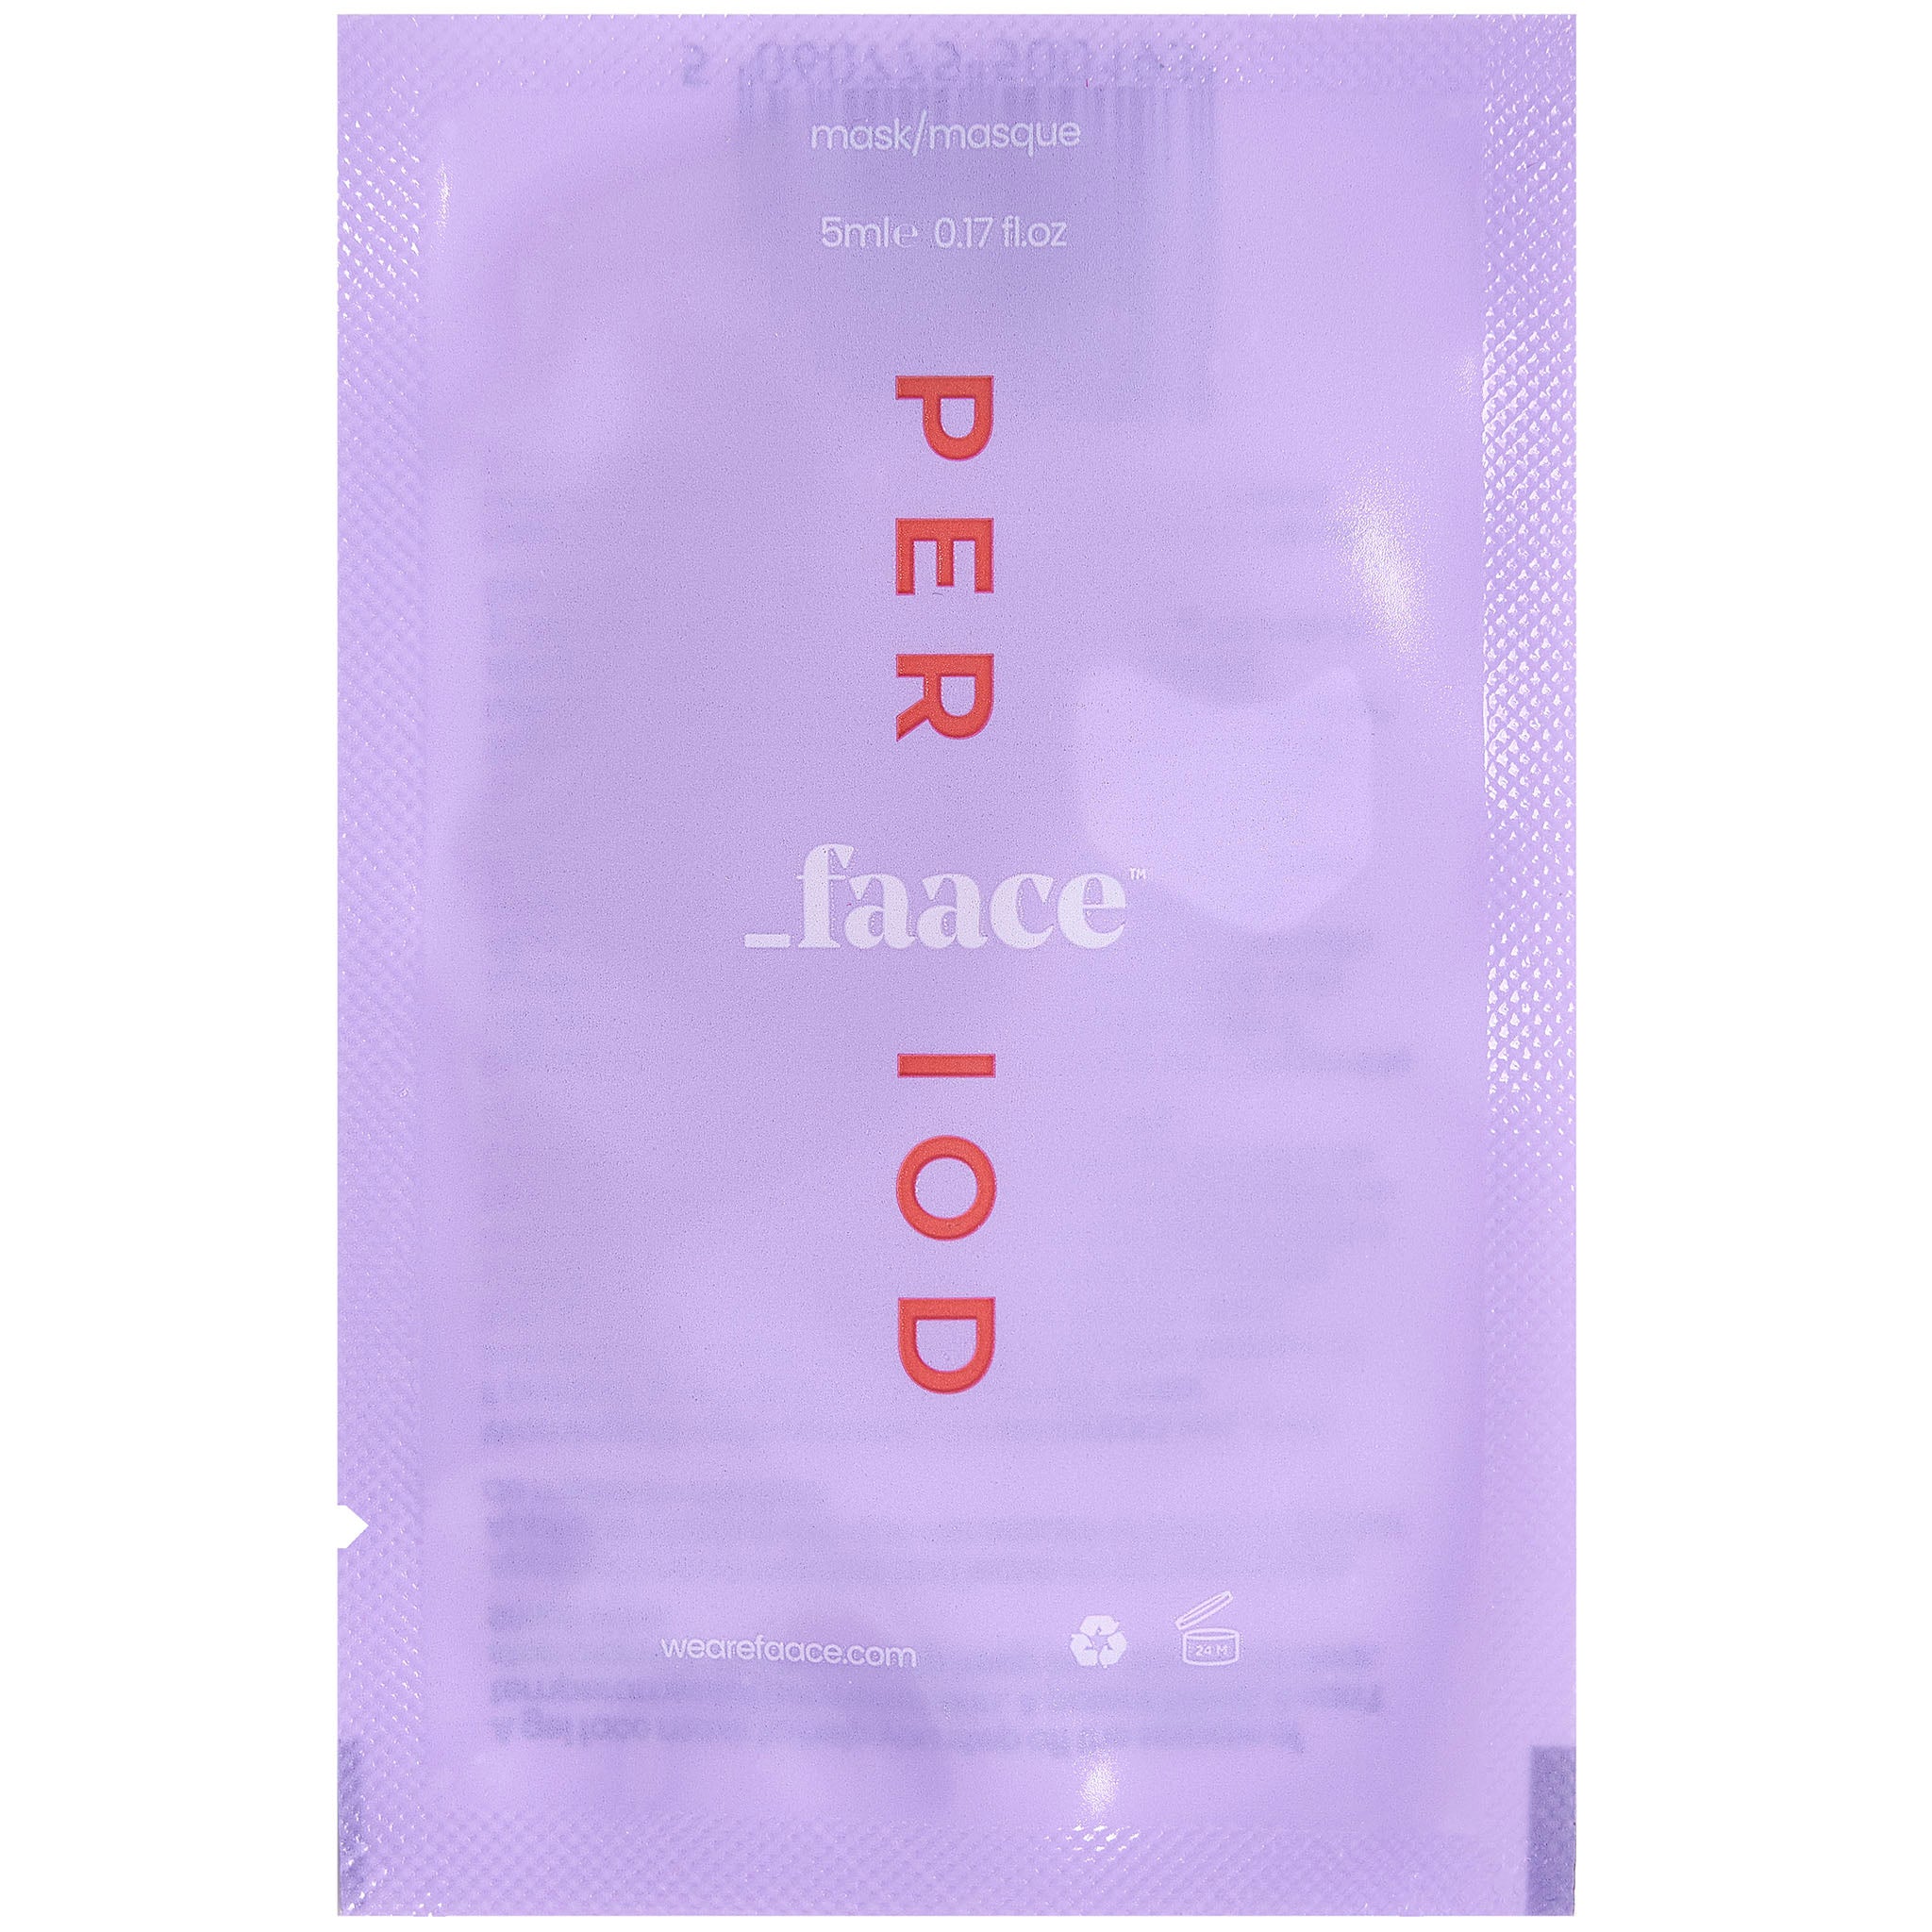 Period Faace Mask - Travel Size - mypure.co.uk